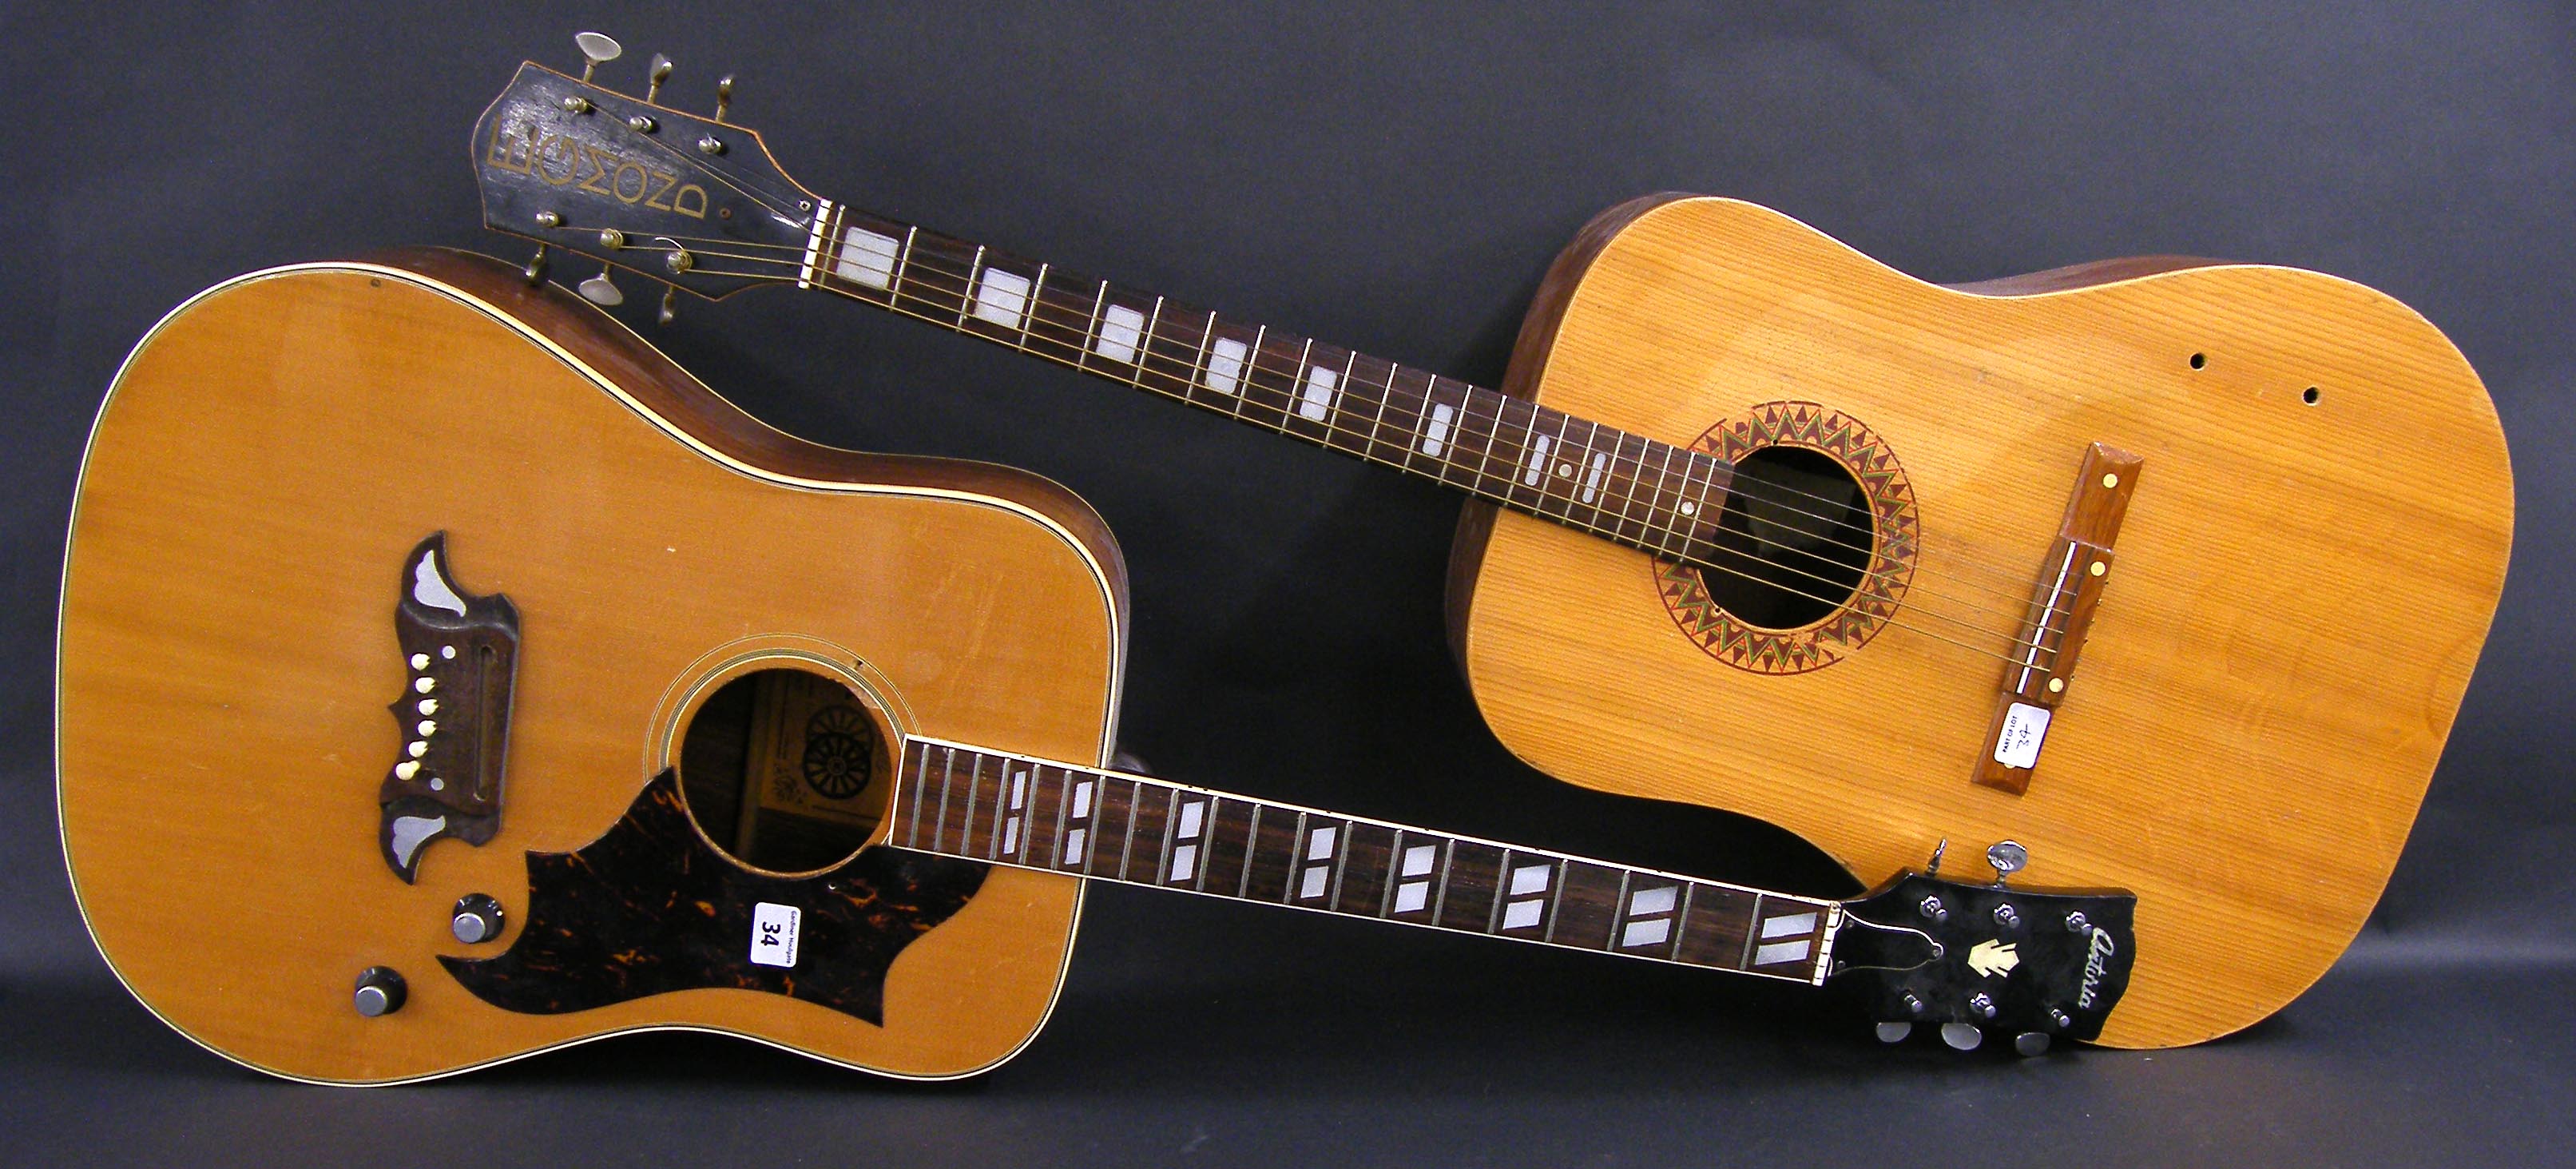 Antoria Folk model 693 electro-acoustic guitar in need of restoration; together with an Egmond